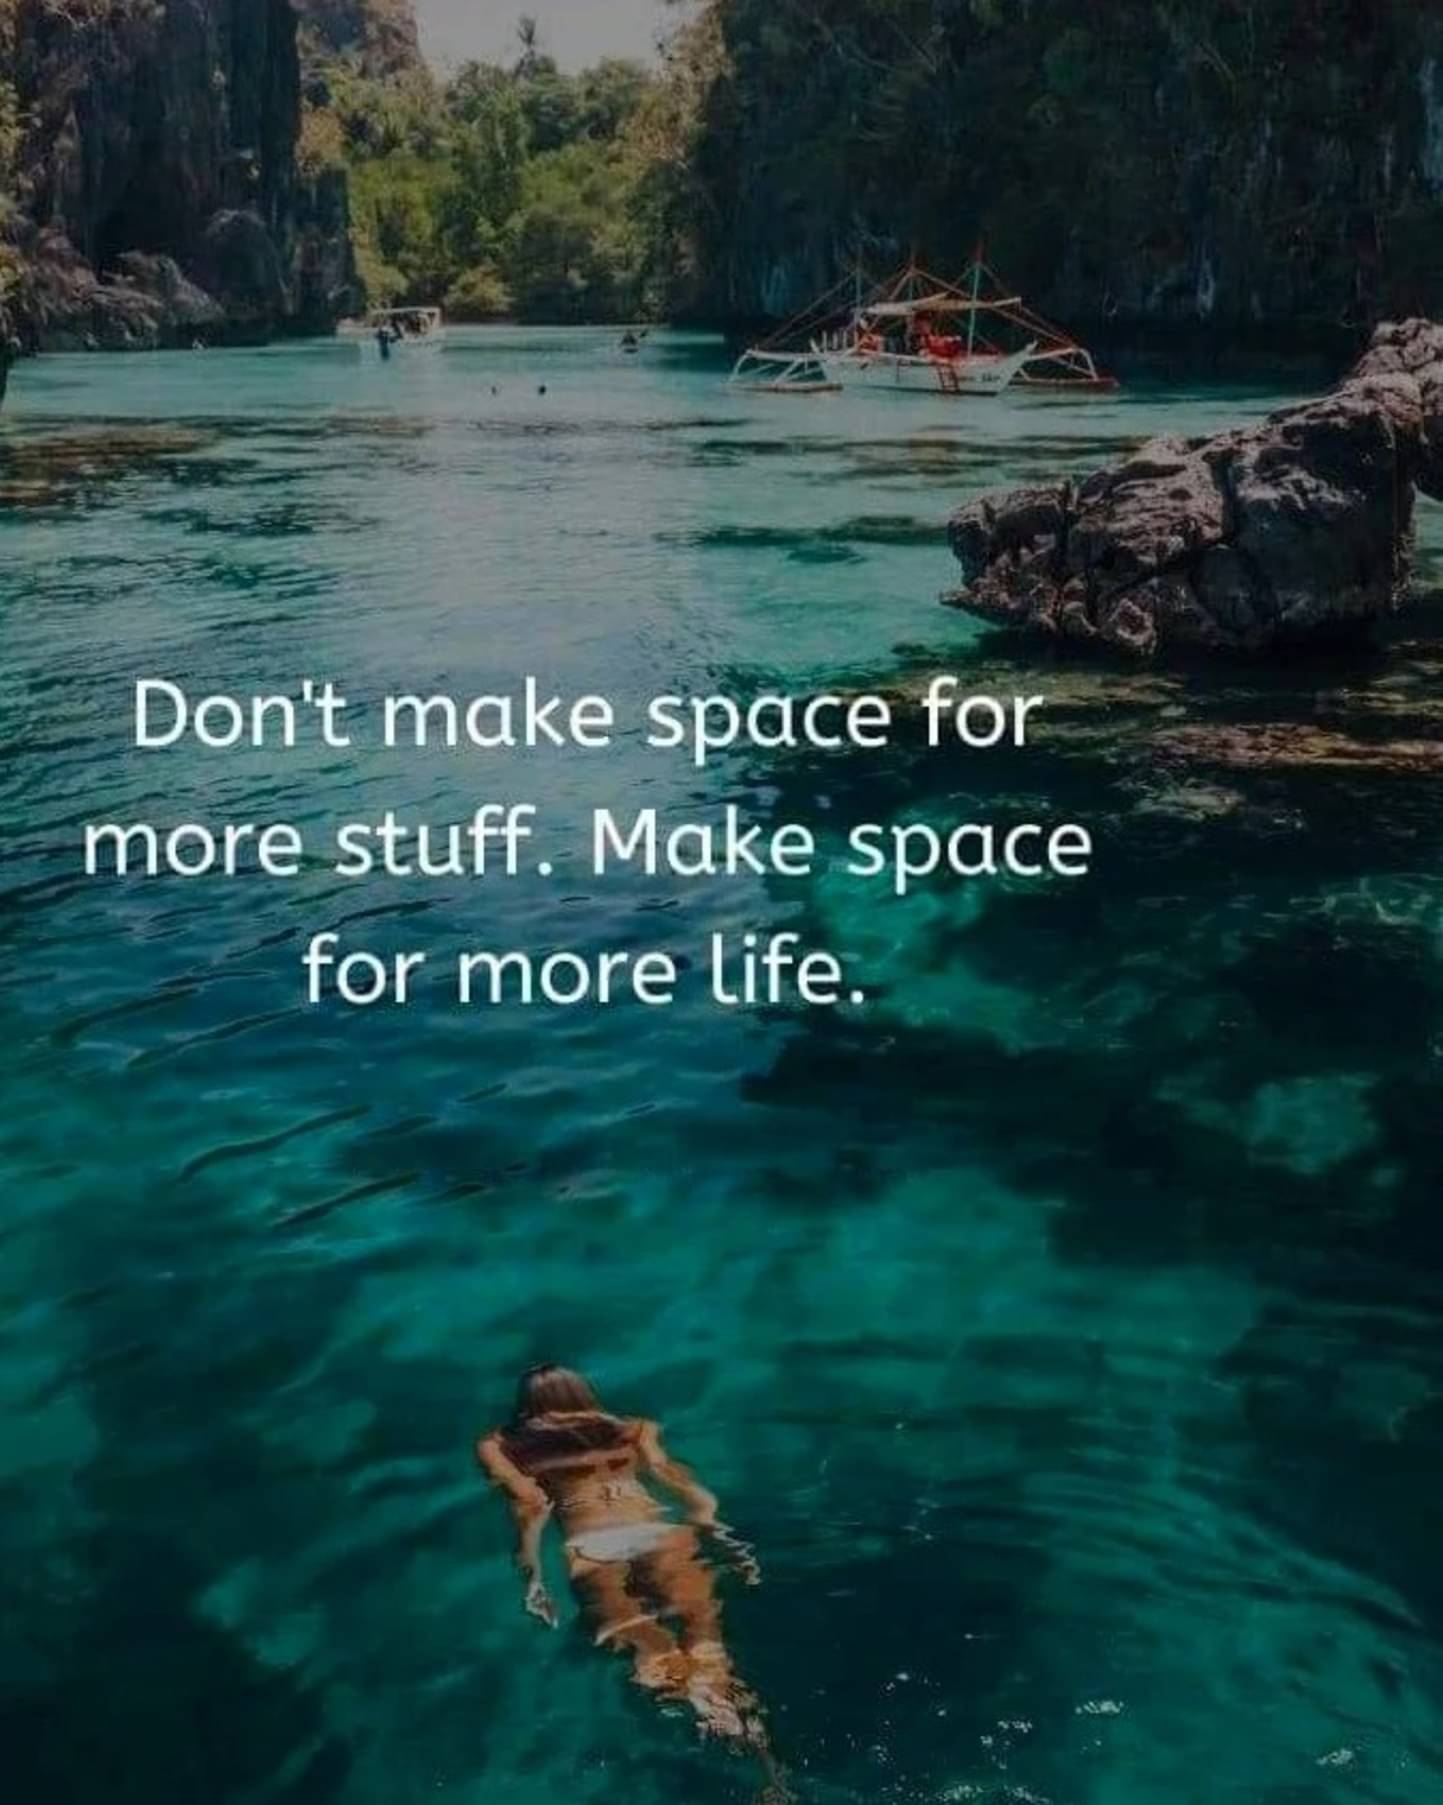 make_space_for_more_life.jpg